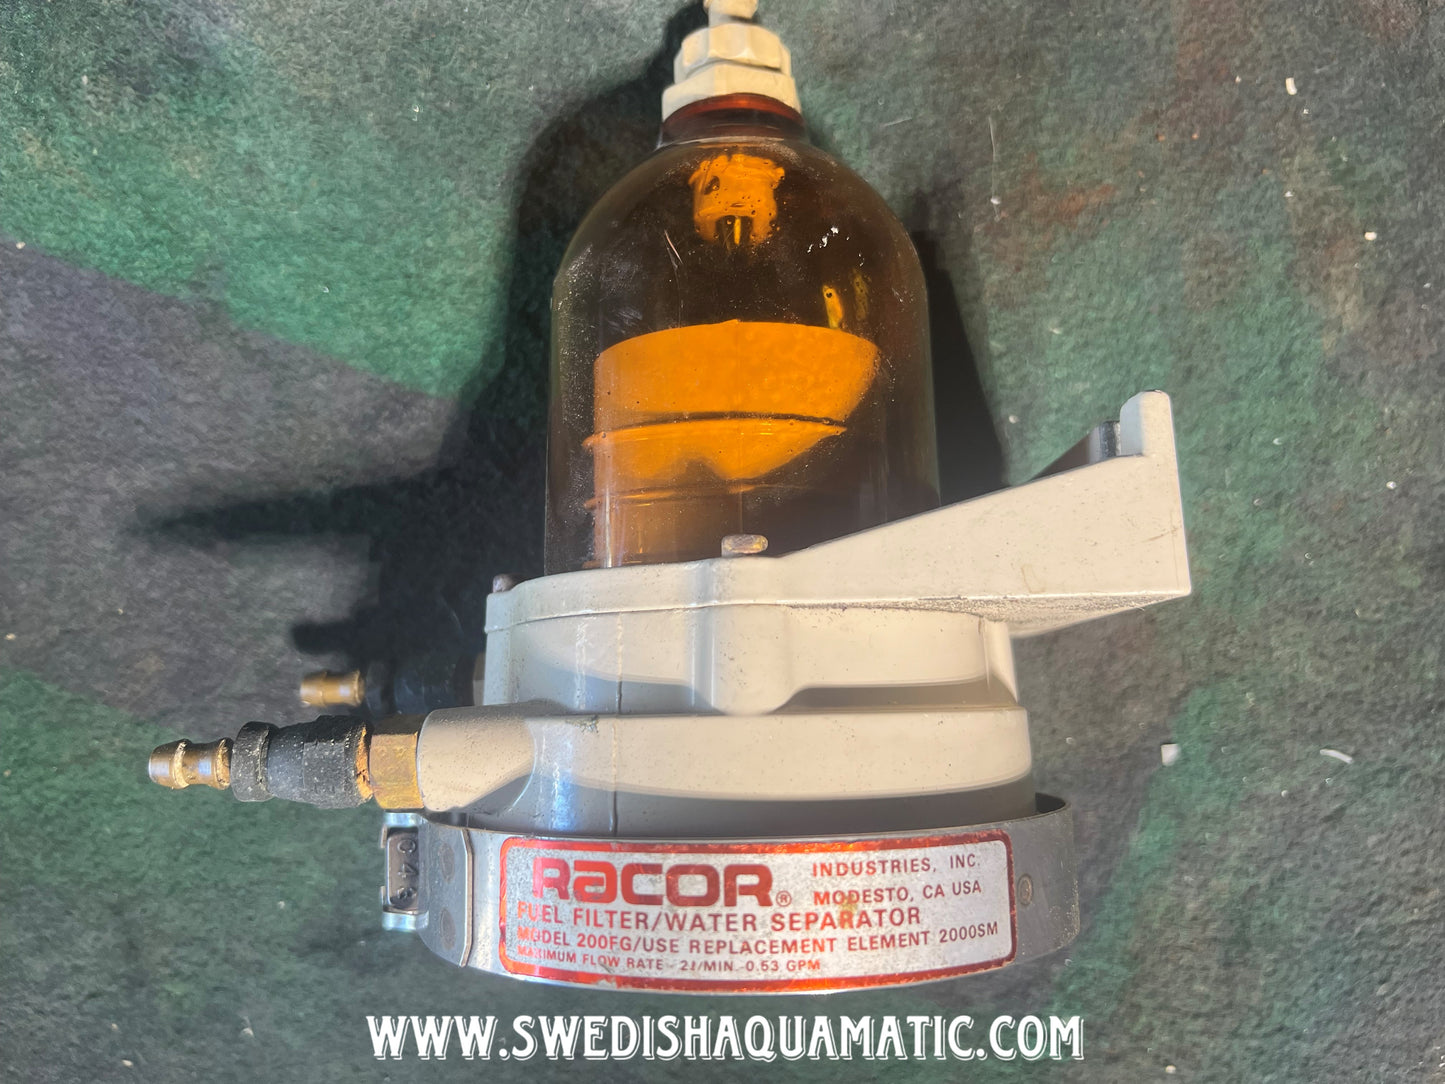 Racor Fuel Filter Water Separator .53gpm